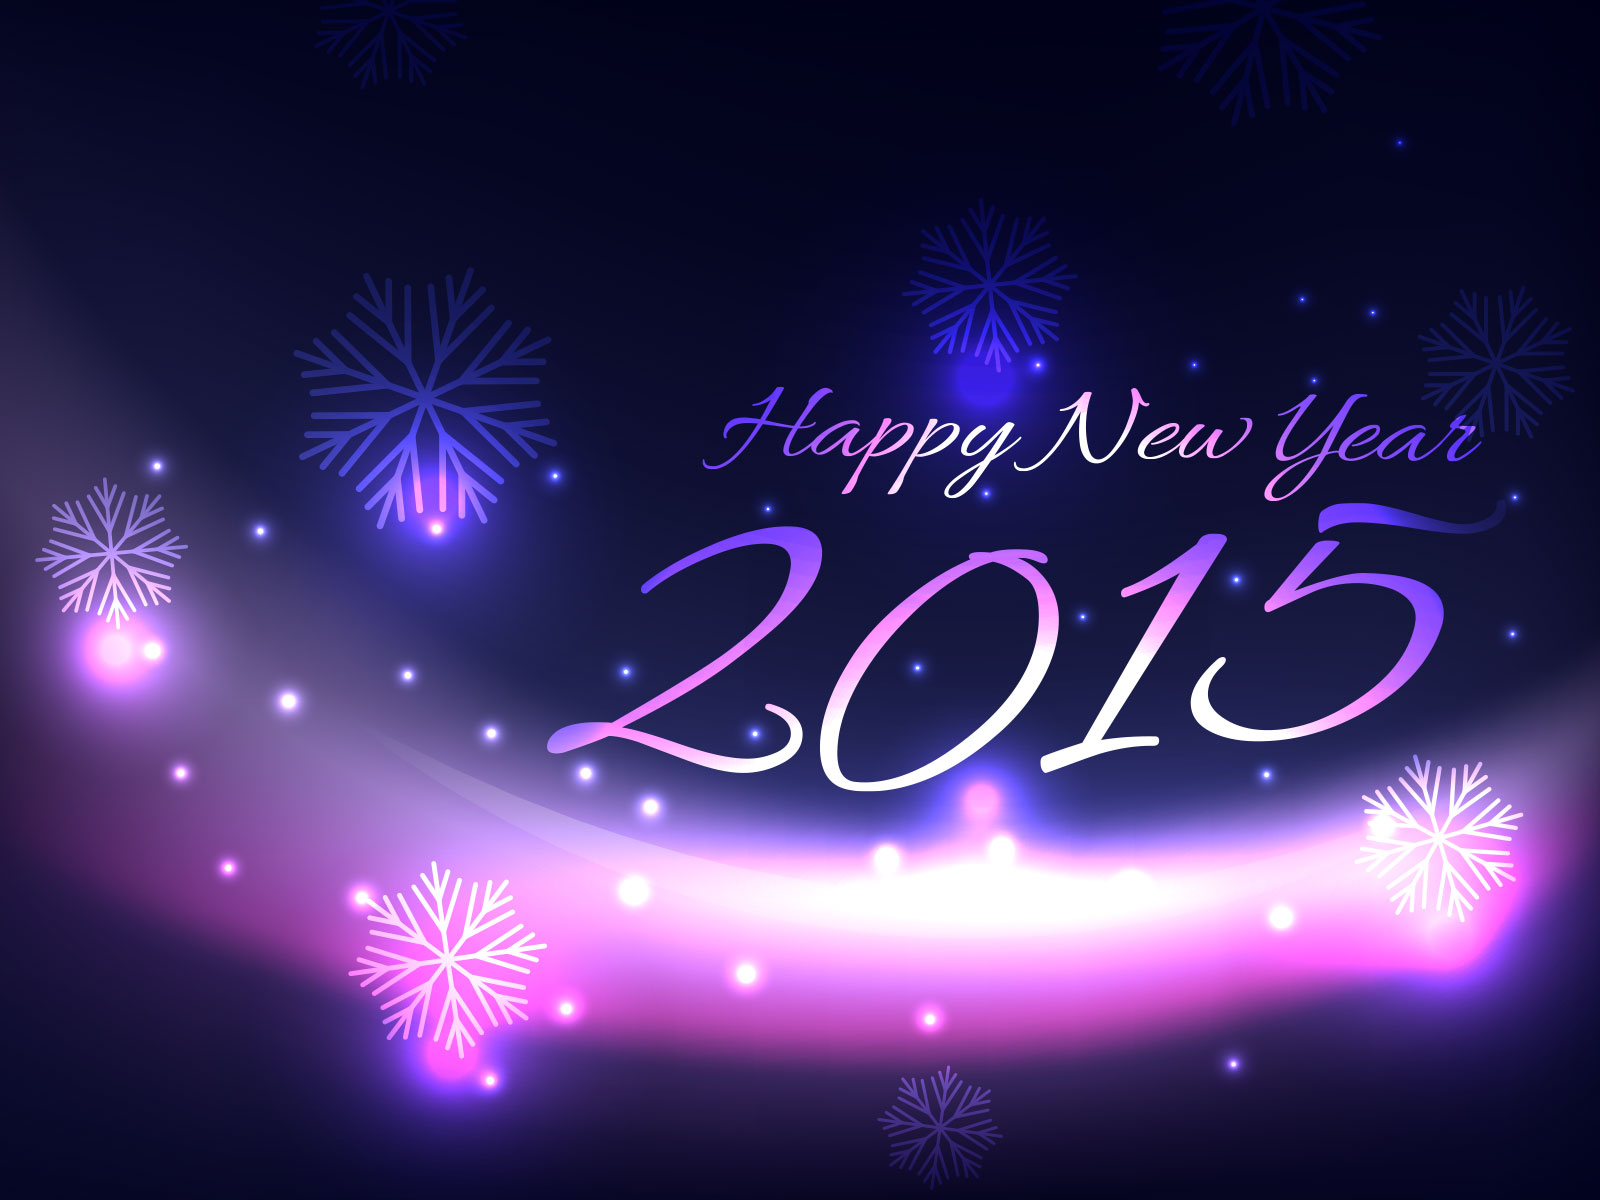 Happy New Year 2015 Wallpapers Images Cover photos